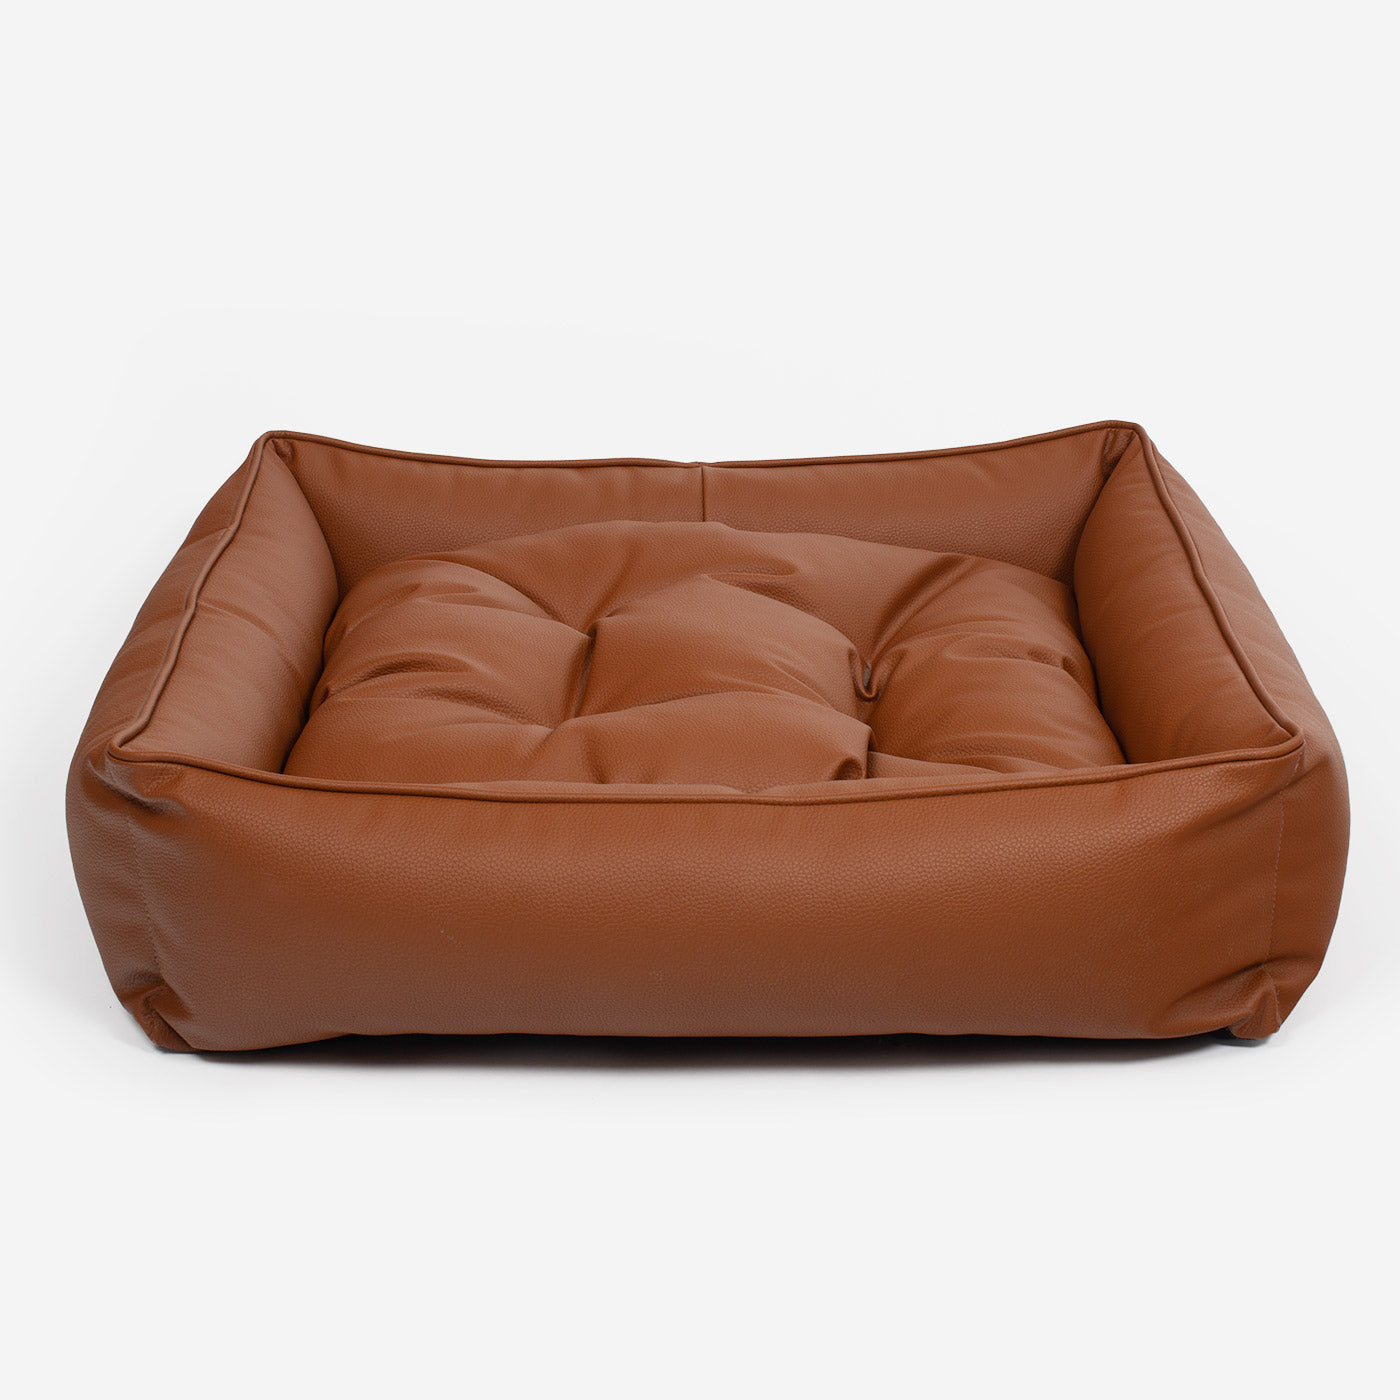 [color:ember] Luxury Handmade Box Bed in Rhino Tough Faux Leather, in Ember, Perfect For Your Pets Nap Time! Available To Personalise at Lords & Labradors